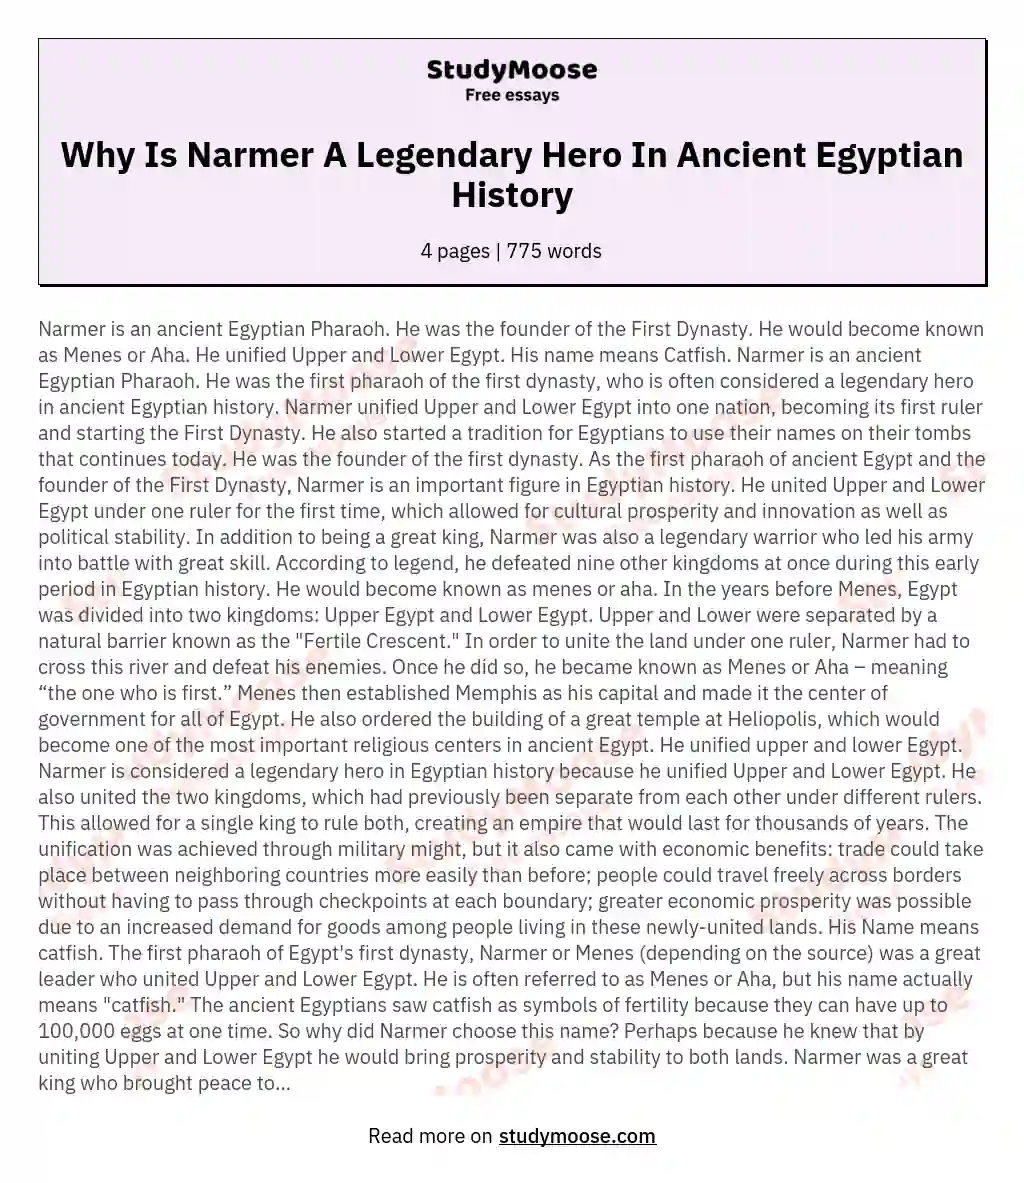 Why Is Narmer A Legendary Hero In Ancient Egyptian History essay